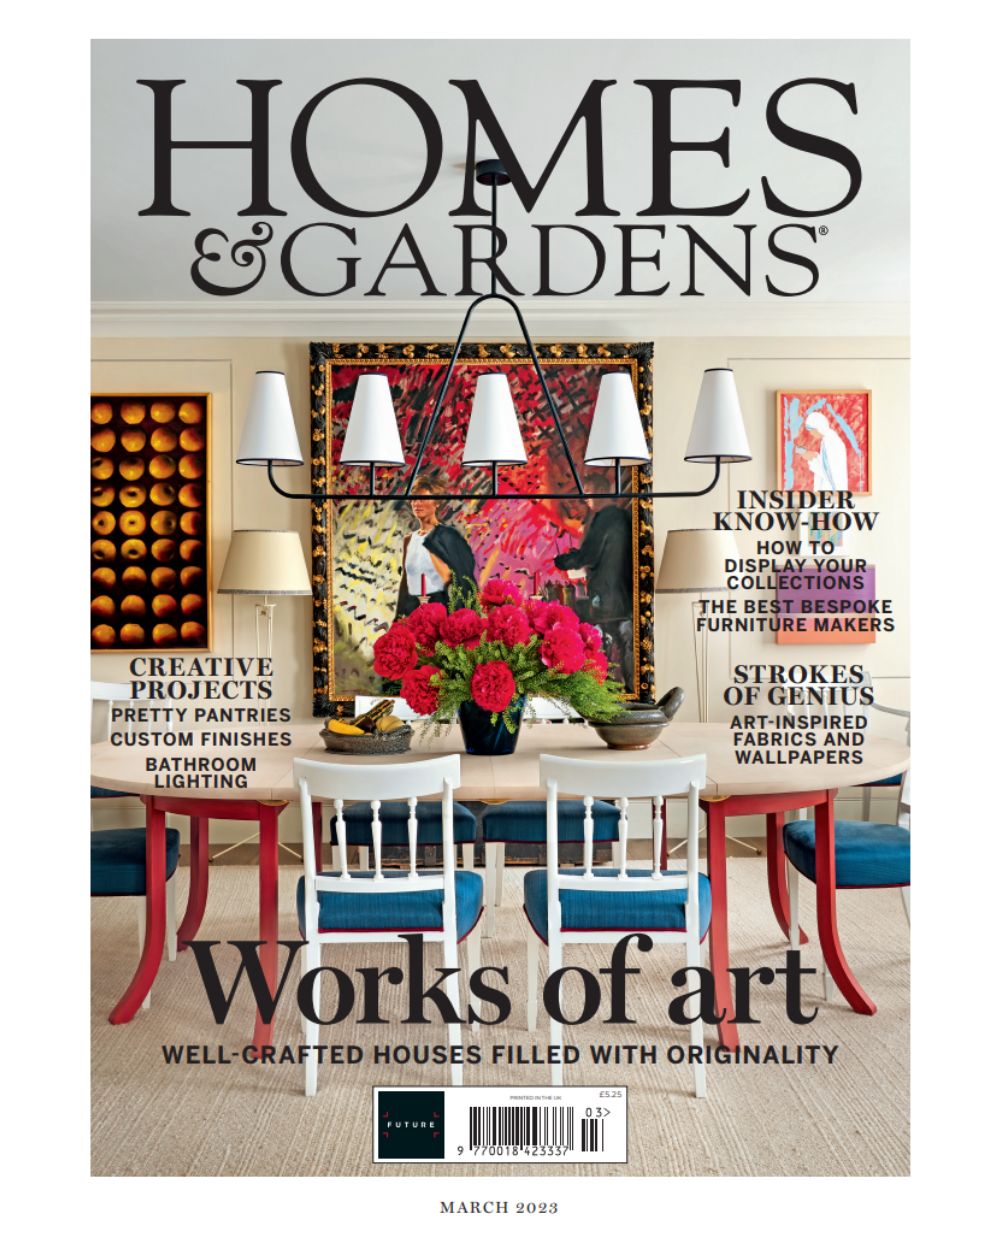 Homes & Gardens March 2023 front cover